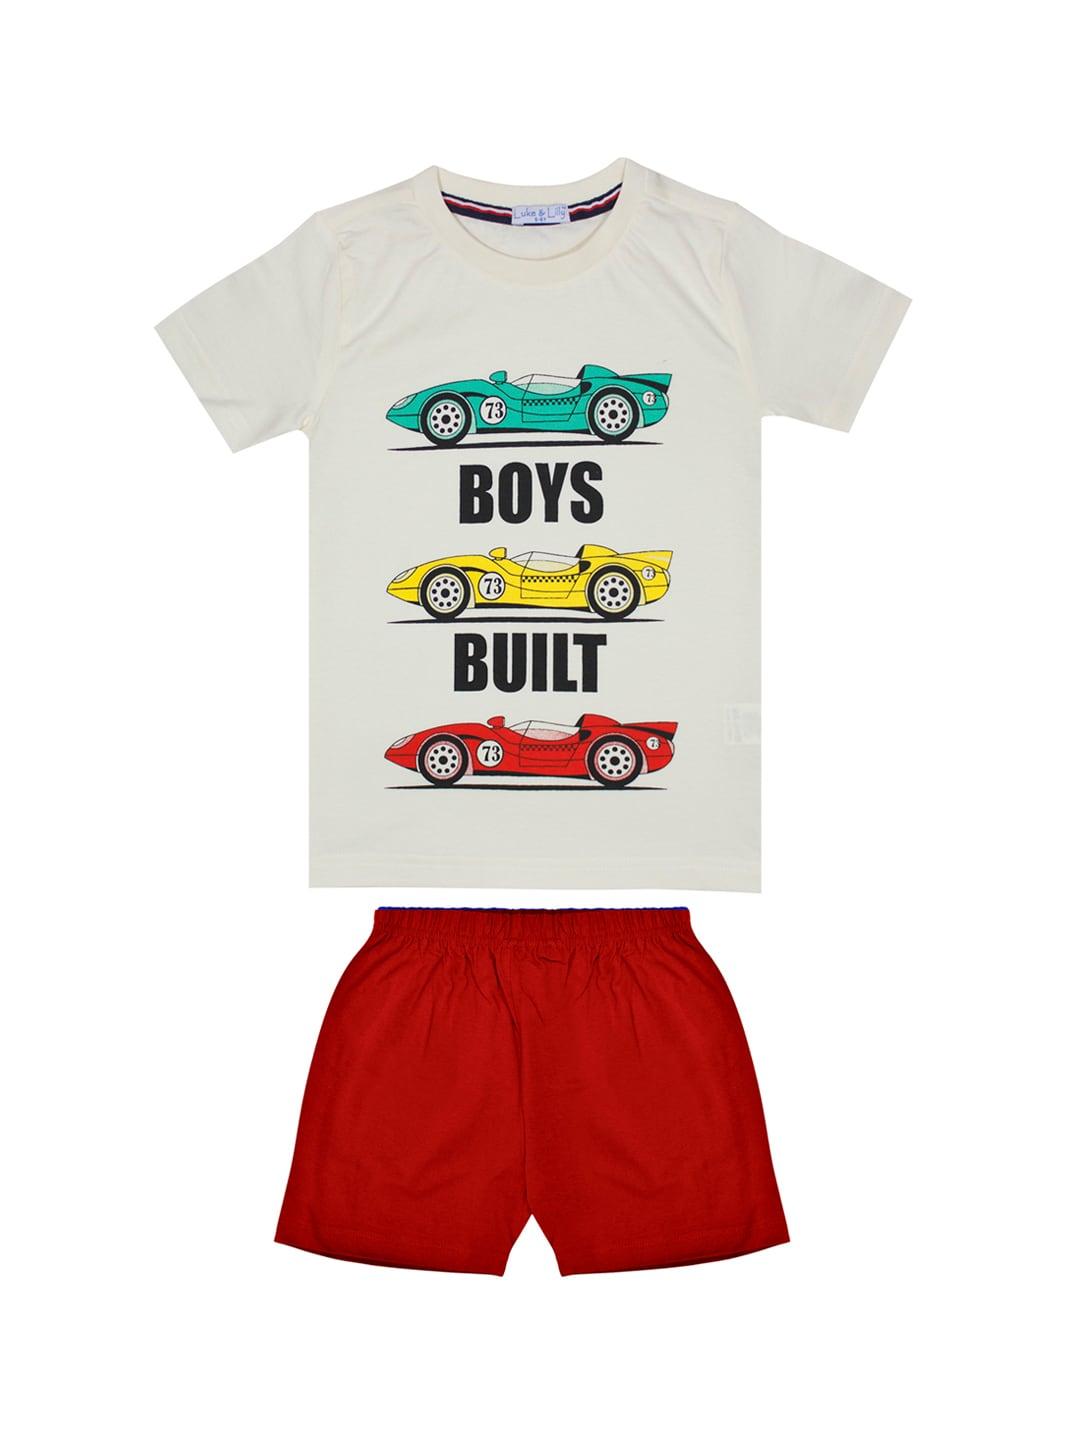 luke-&-lilly-boys-off-white-&-red-printed-clothing-set